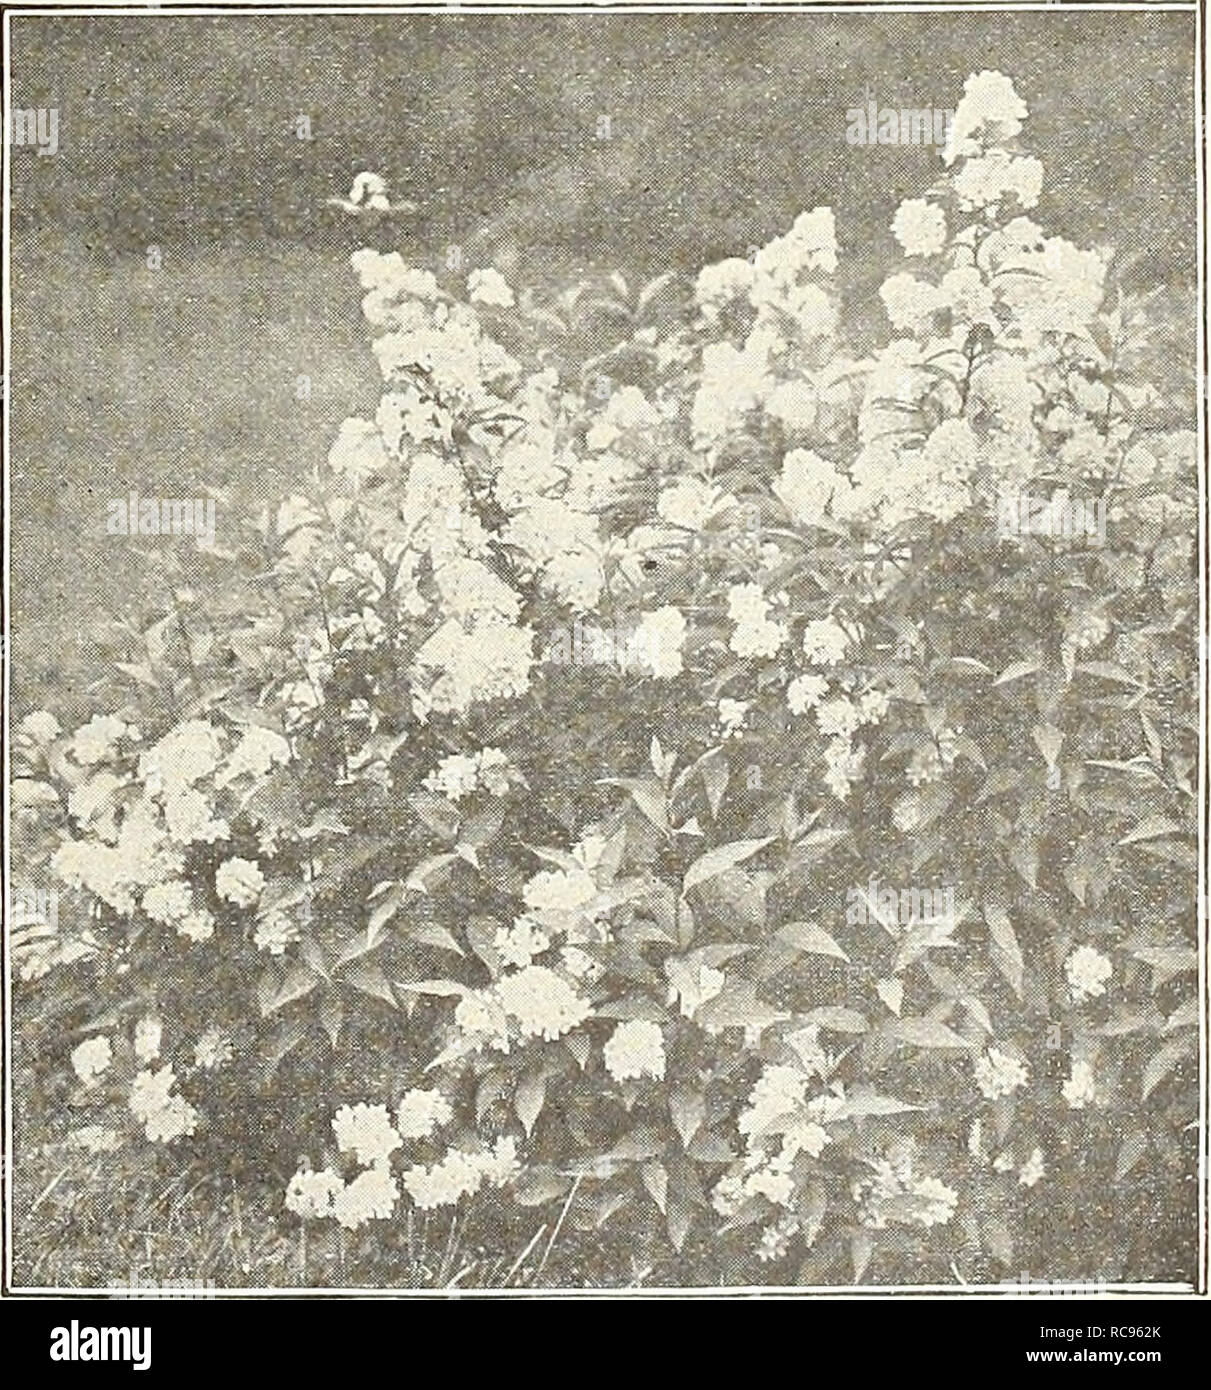 . Dreer's garden book 1927. Seeds Catalogs; Nursery stock Catalogs; Gardening Equipment and supplies Catalogs; Flowers Seeds Catalogs; Vegetables Seeds Catalogs; Fruit Seeds Catalogs. Deutzia Crenata Magnifica Deutzias. Well-known profuse flowering Shrubs, blooming in spring or early summer. The dwarf varieties are desirable for forcing under glass. — Candidissima plena. A fine tall, double white, 60 cts. each. — Crenata Magnifica. A most distinct variety with excep- tionally large corymbs of pure white double flowers, produced in wonderful profusion. 60 cts. each. — Crenata Mirabilis (New). O Stock Photo